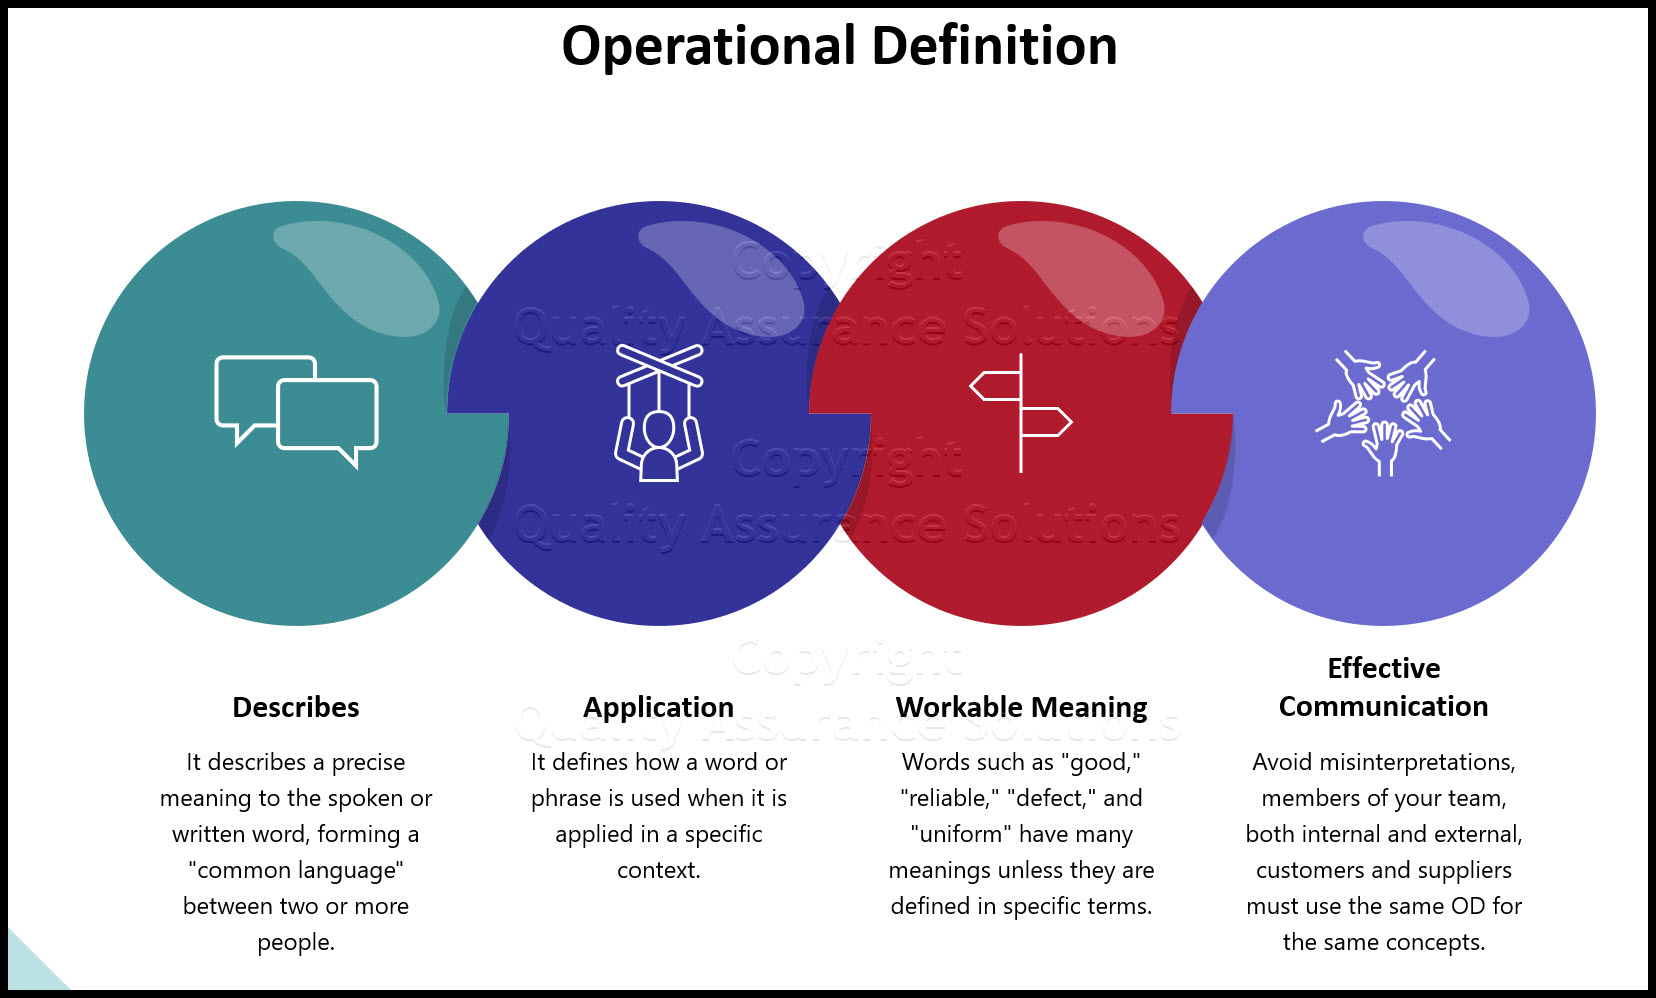 What is an Operational Definition, It gives a precise meaning to the spoken or written word, forming a common language between two or more people